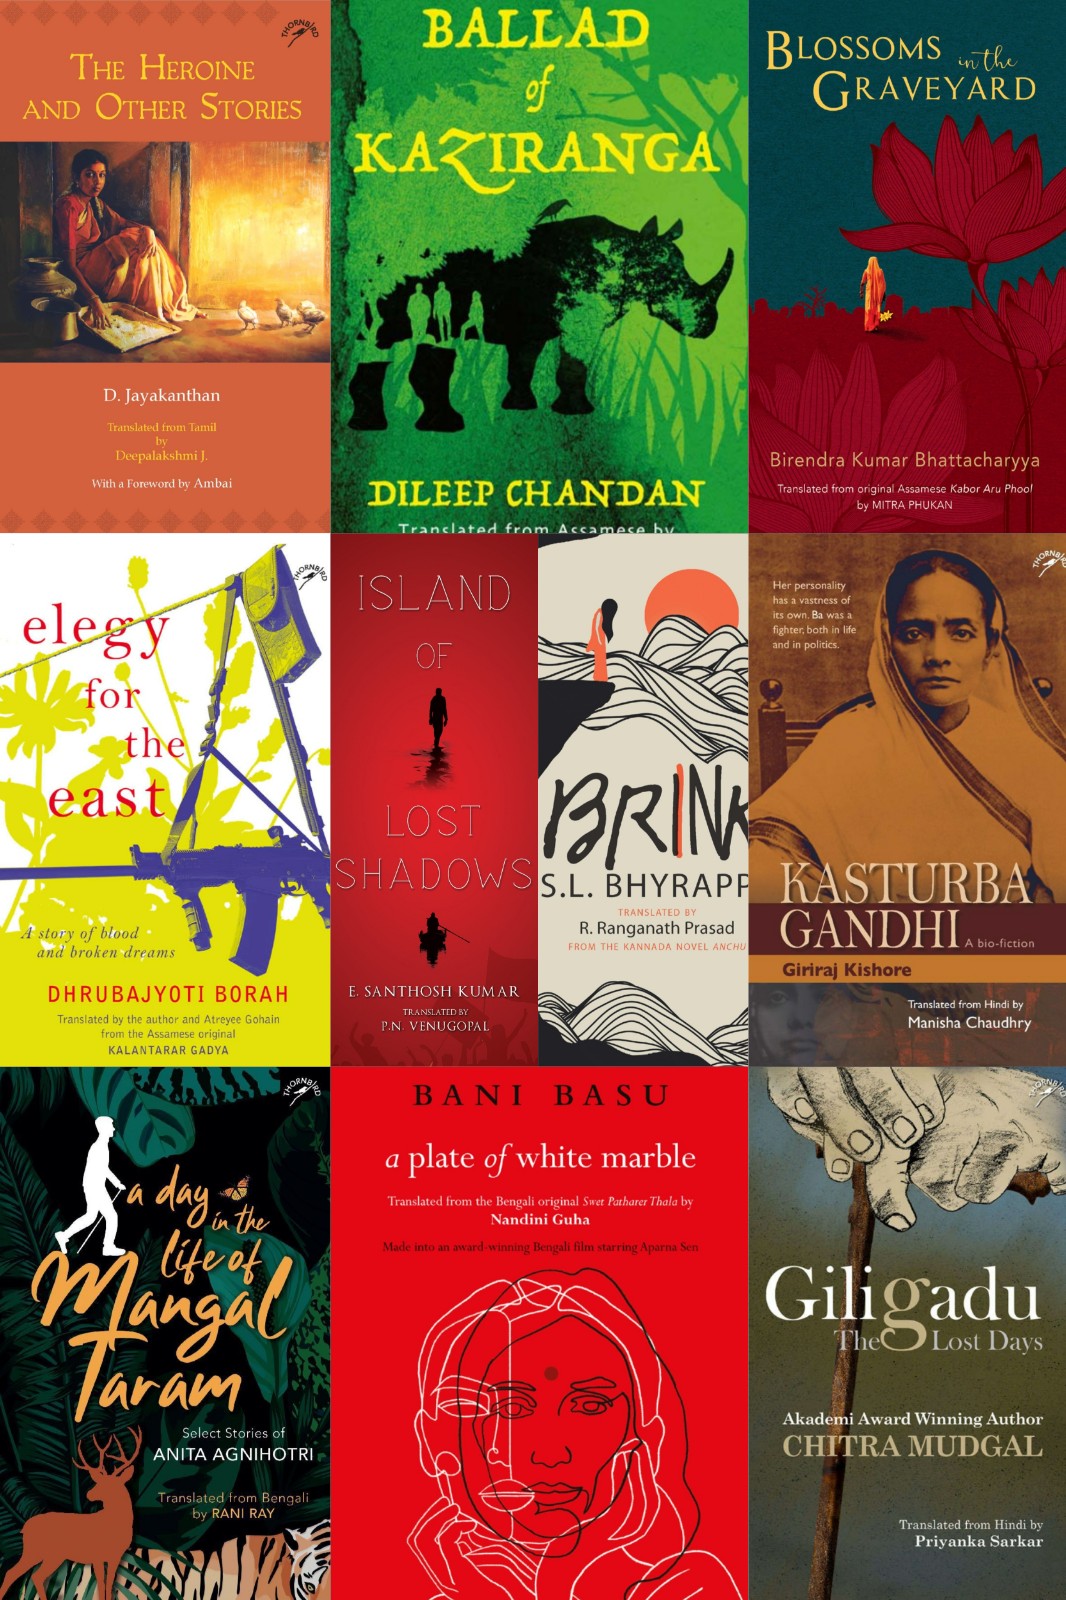 Download these books at Re 1 per book: Books on offer include translated works from Indian regional languages into English